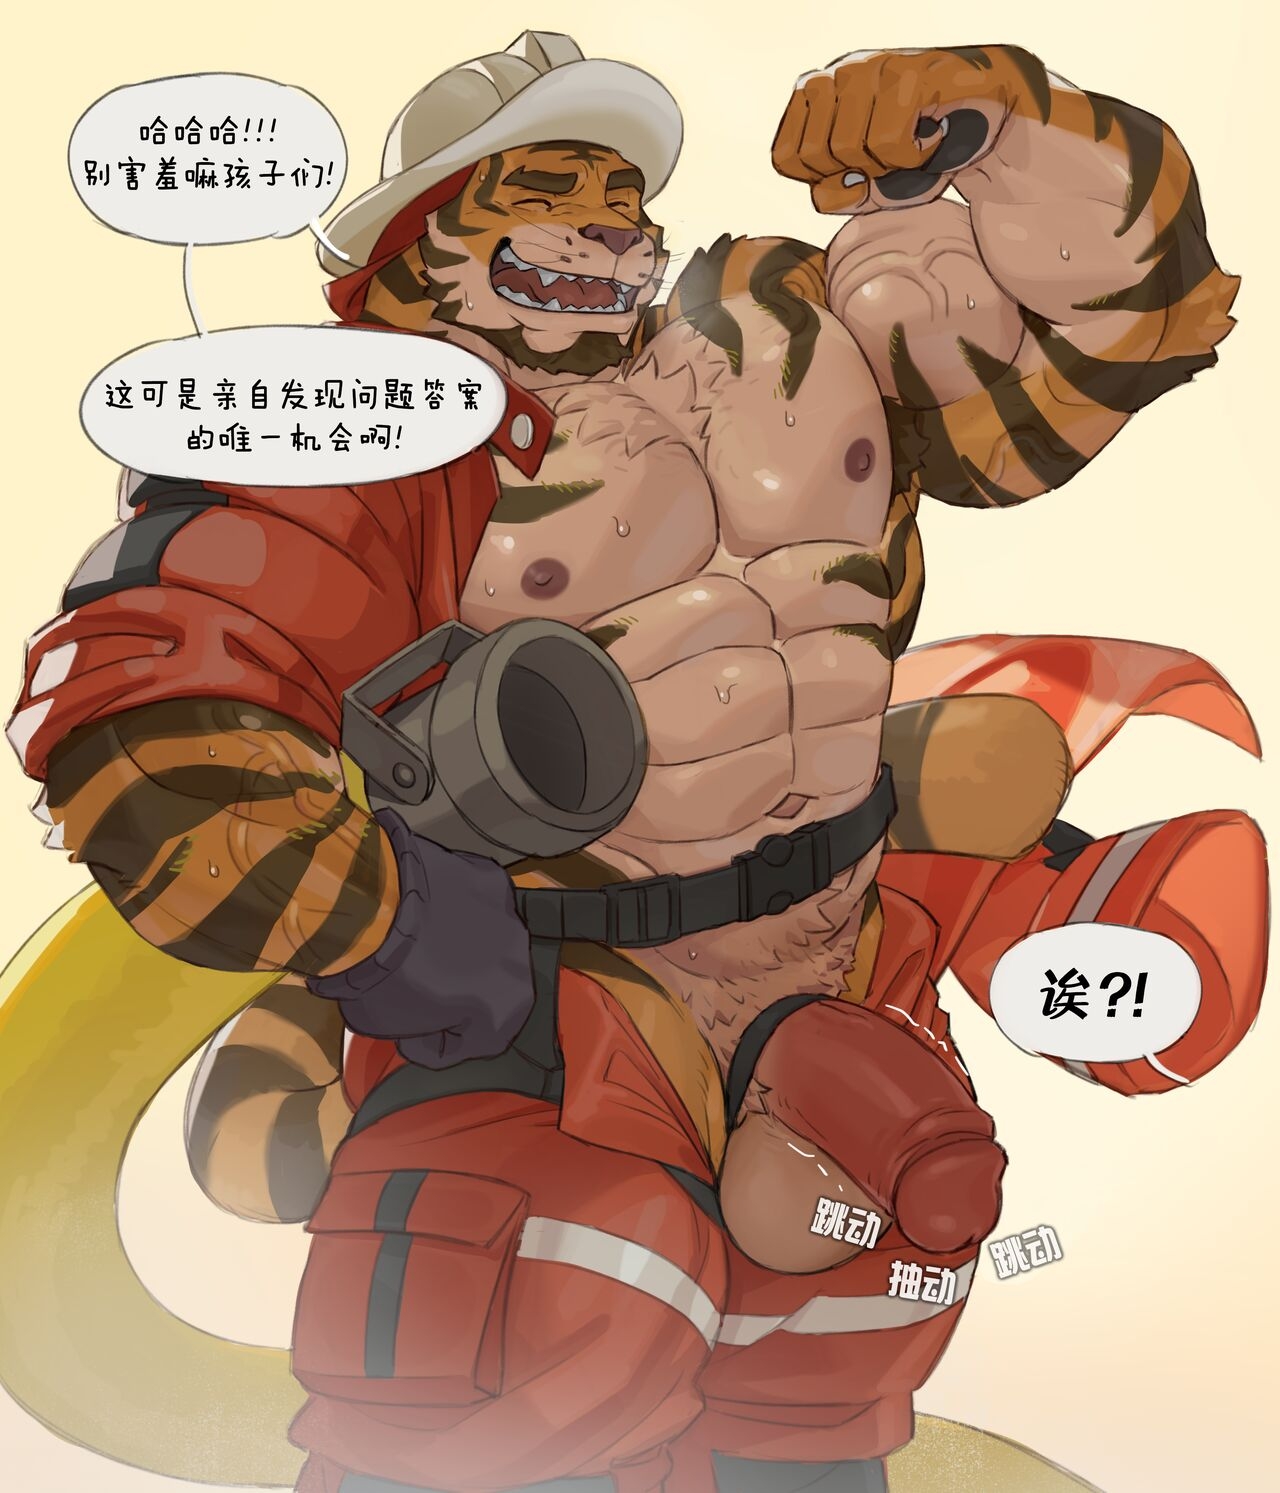 [Imatoart] Tiger Fire Chief's Training Session | 老虎消防队长的训练时间! [Chinese][Translated by Chrome Heart Tags] 6